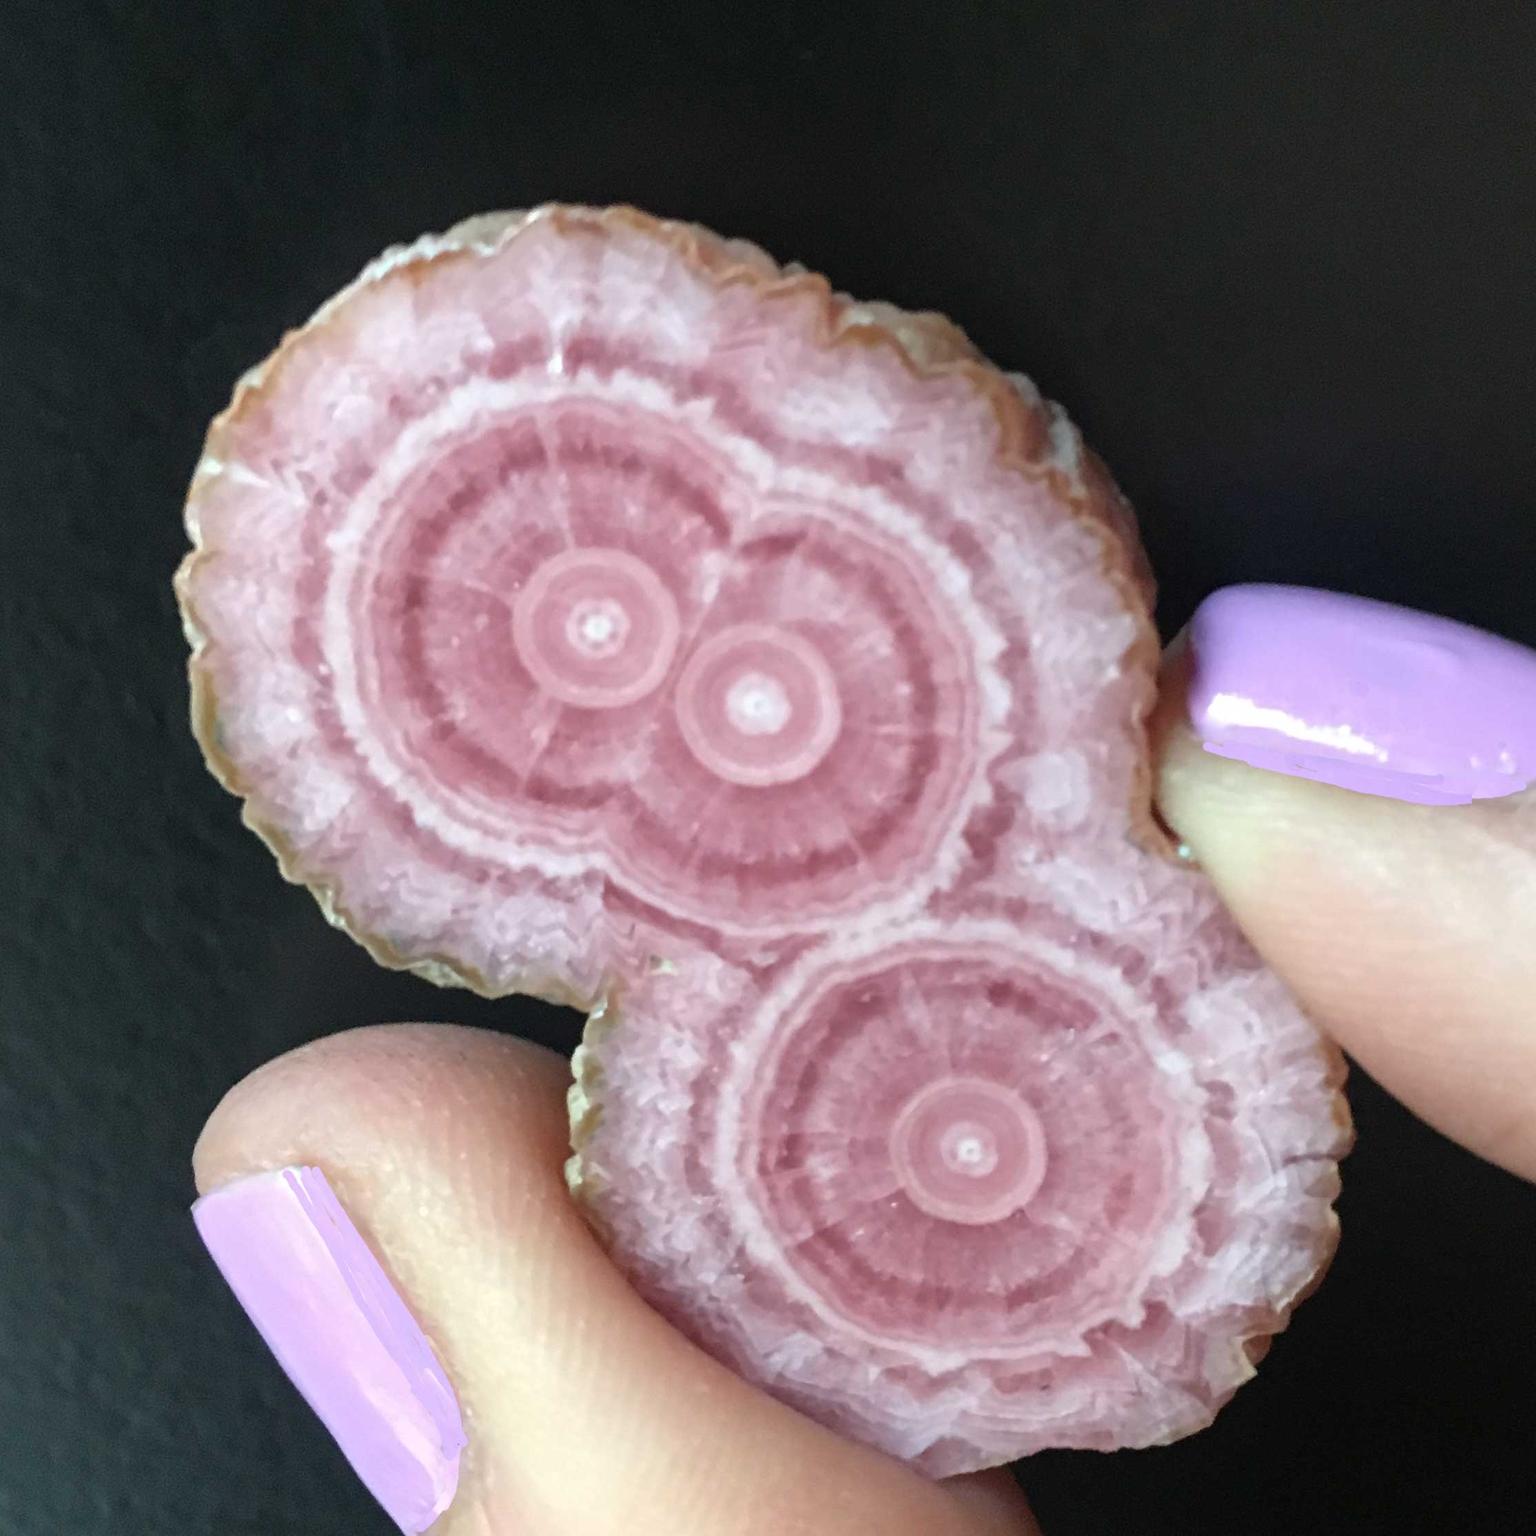 Lydia Courteille shows us the raw rhodochrosite from Argentina used in the Rosa del Inca jewels